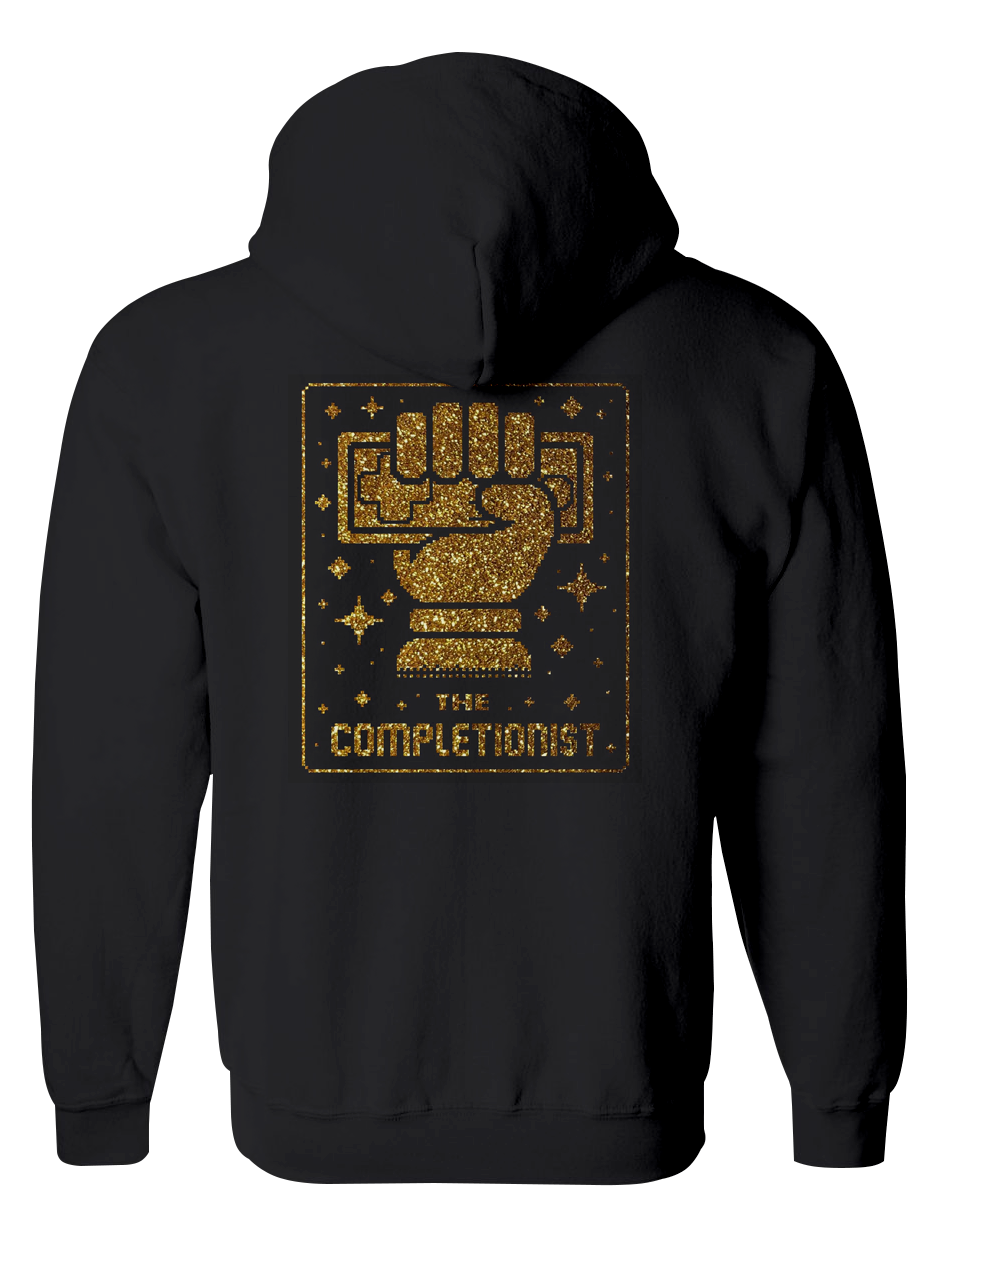 "The Completionist" 10 Year Anniversary Zip Up Hoodie